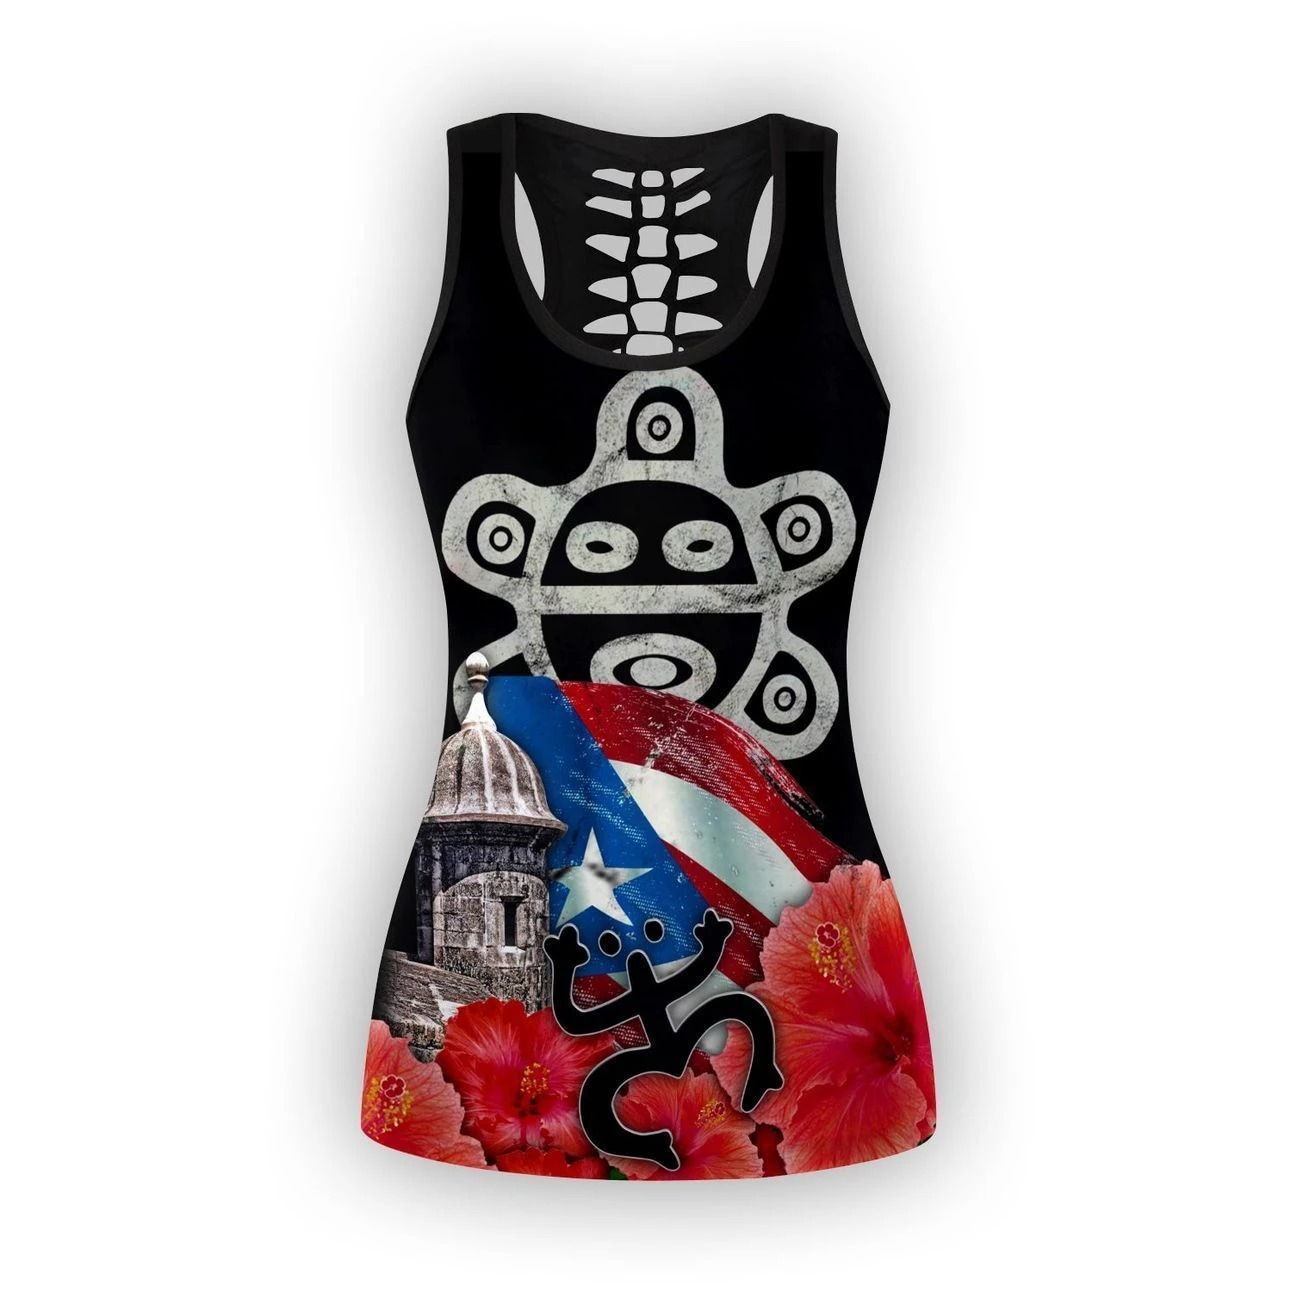 Puerto rice sol taino outfit legging and tank top 3